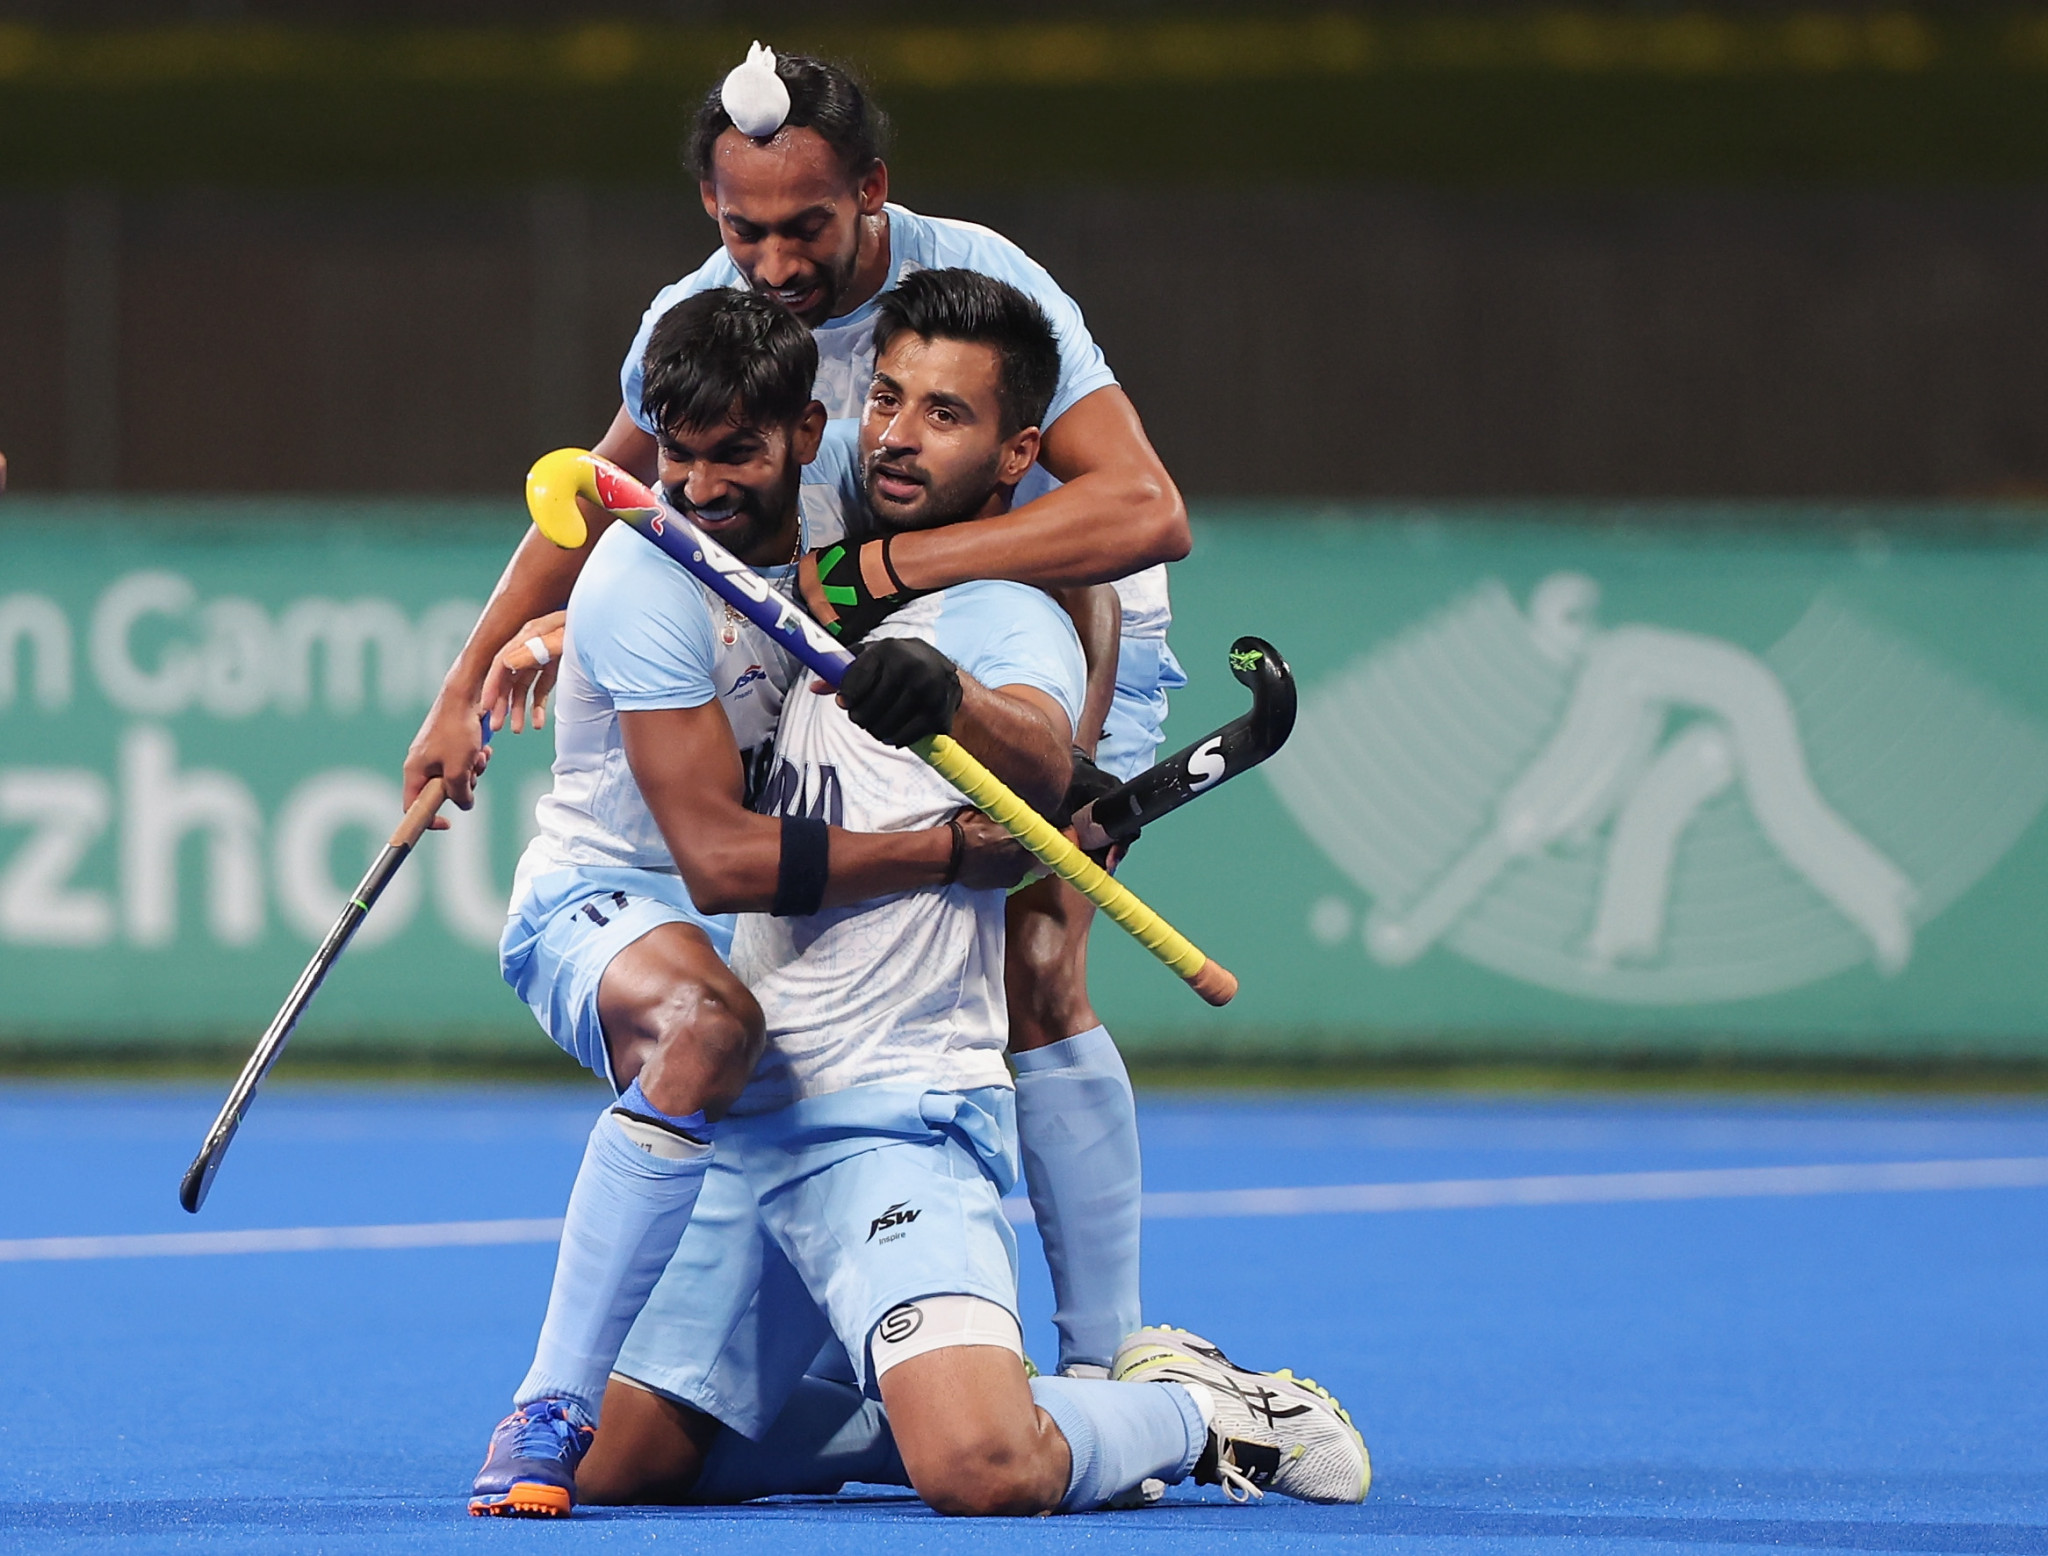 Indian Men's Hockey Team Triumphs at Asian Games 2022, Secures